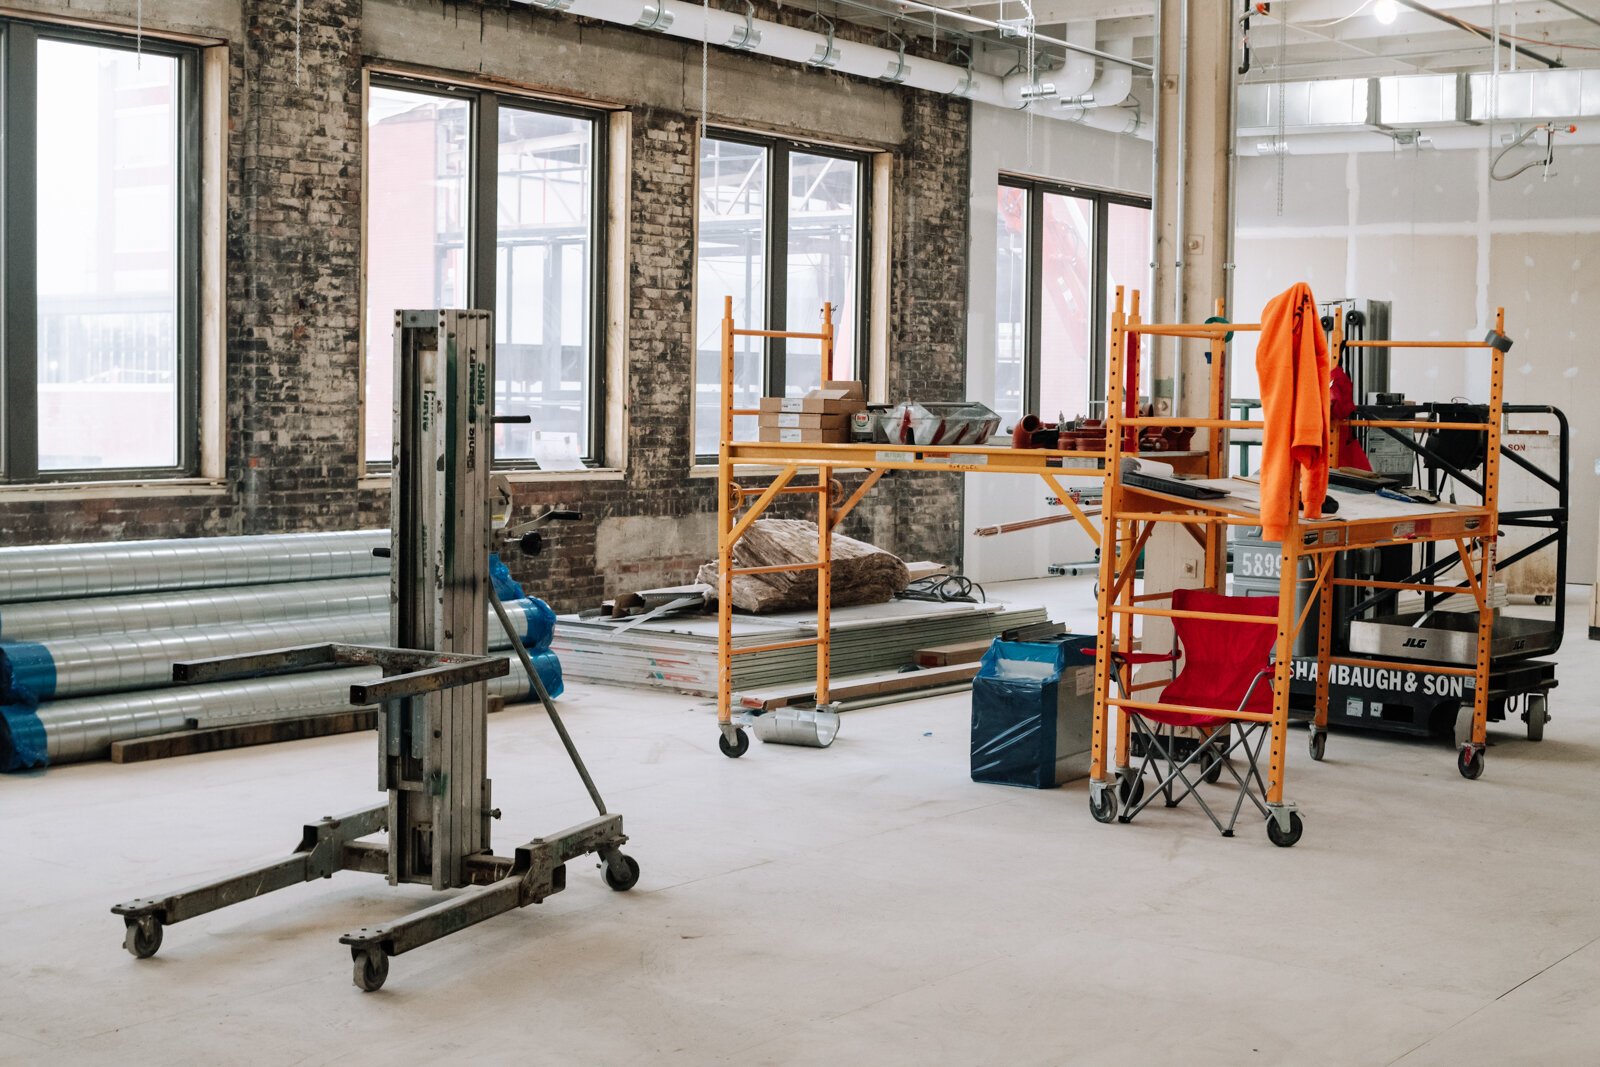 The future space of the Fort Wayne Community Schools Amp Lab inside Building 31 on the West Campus of Electric Works. (December 2021)